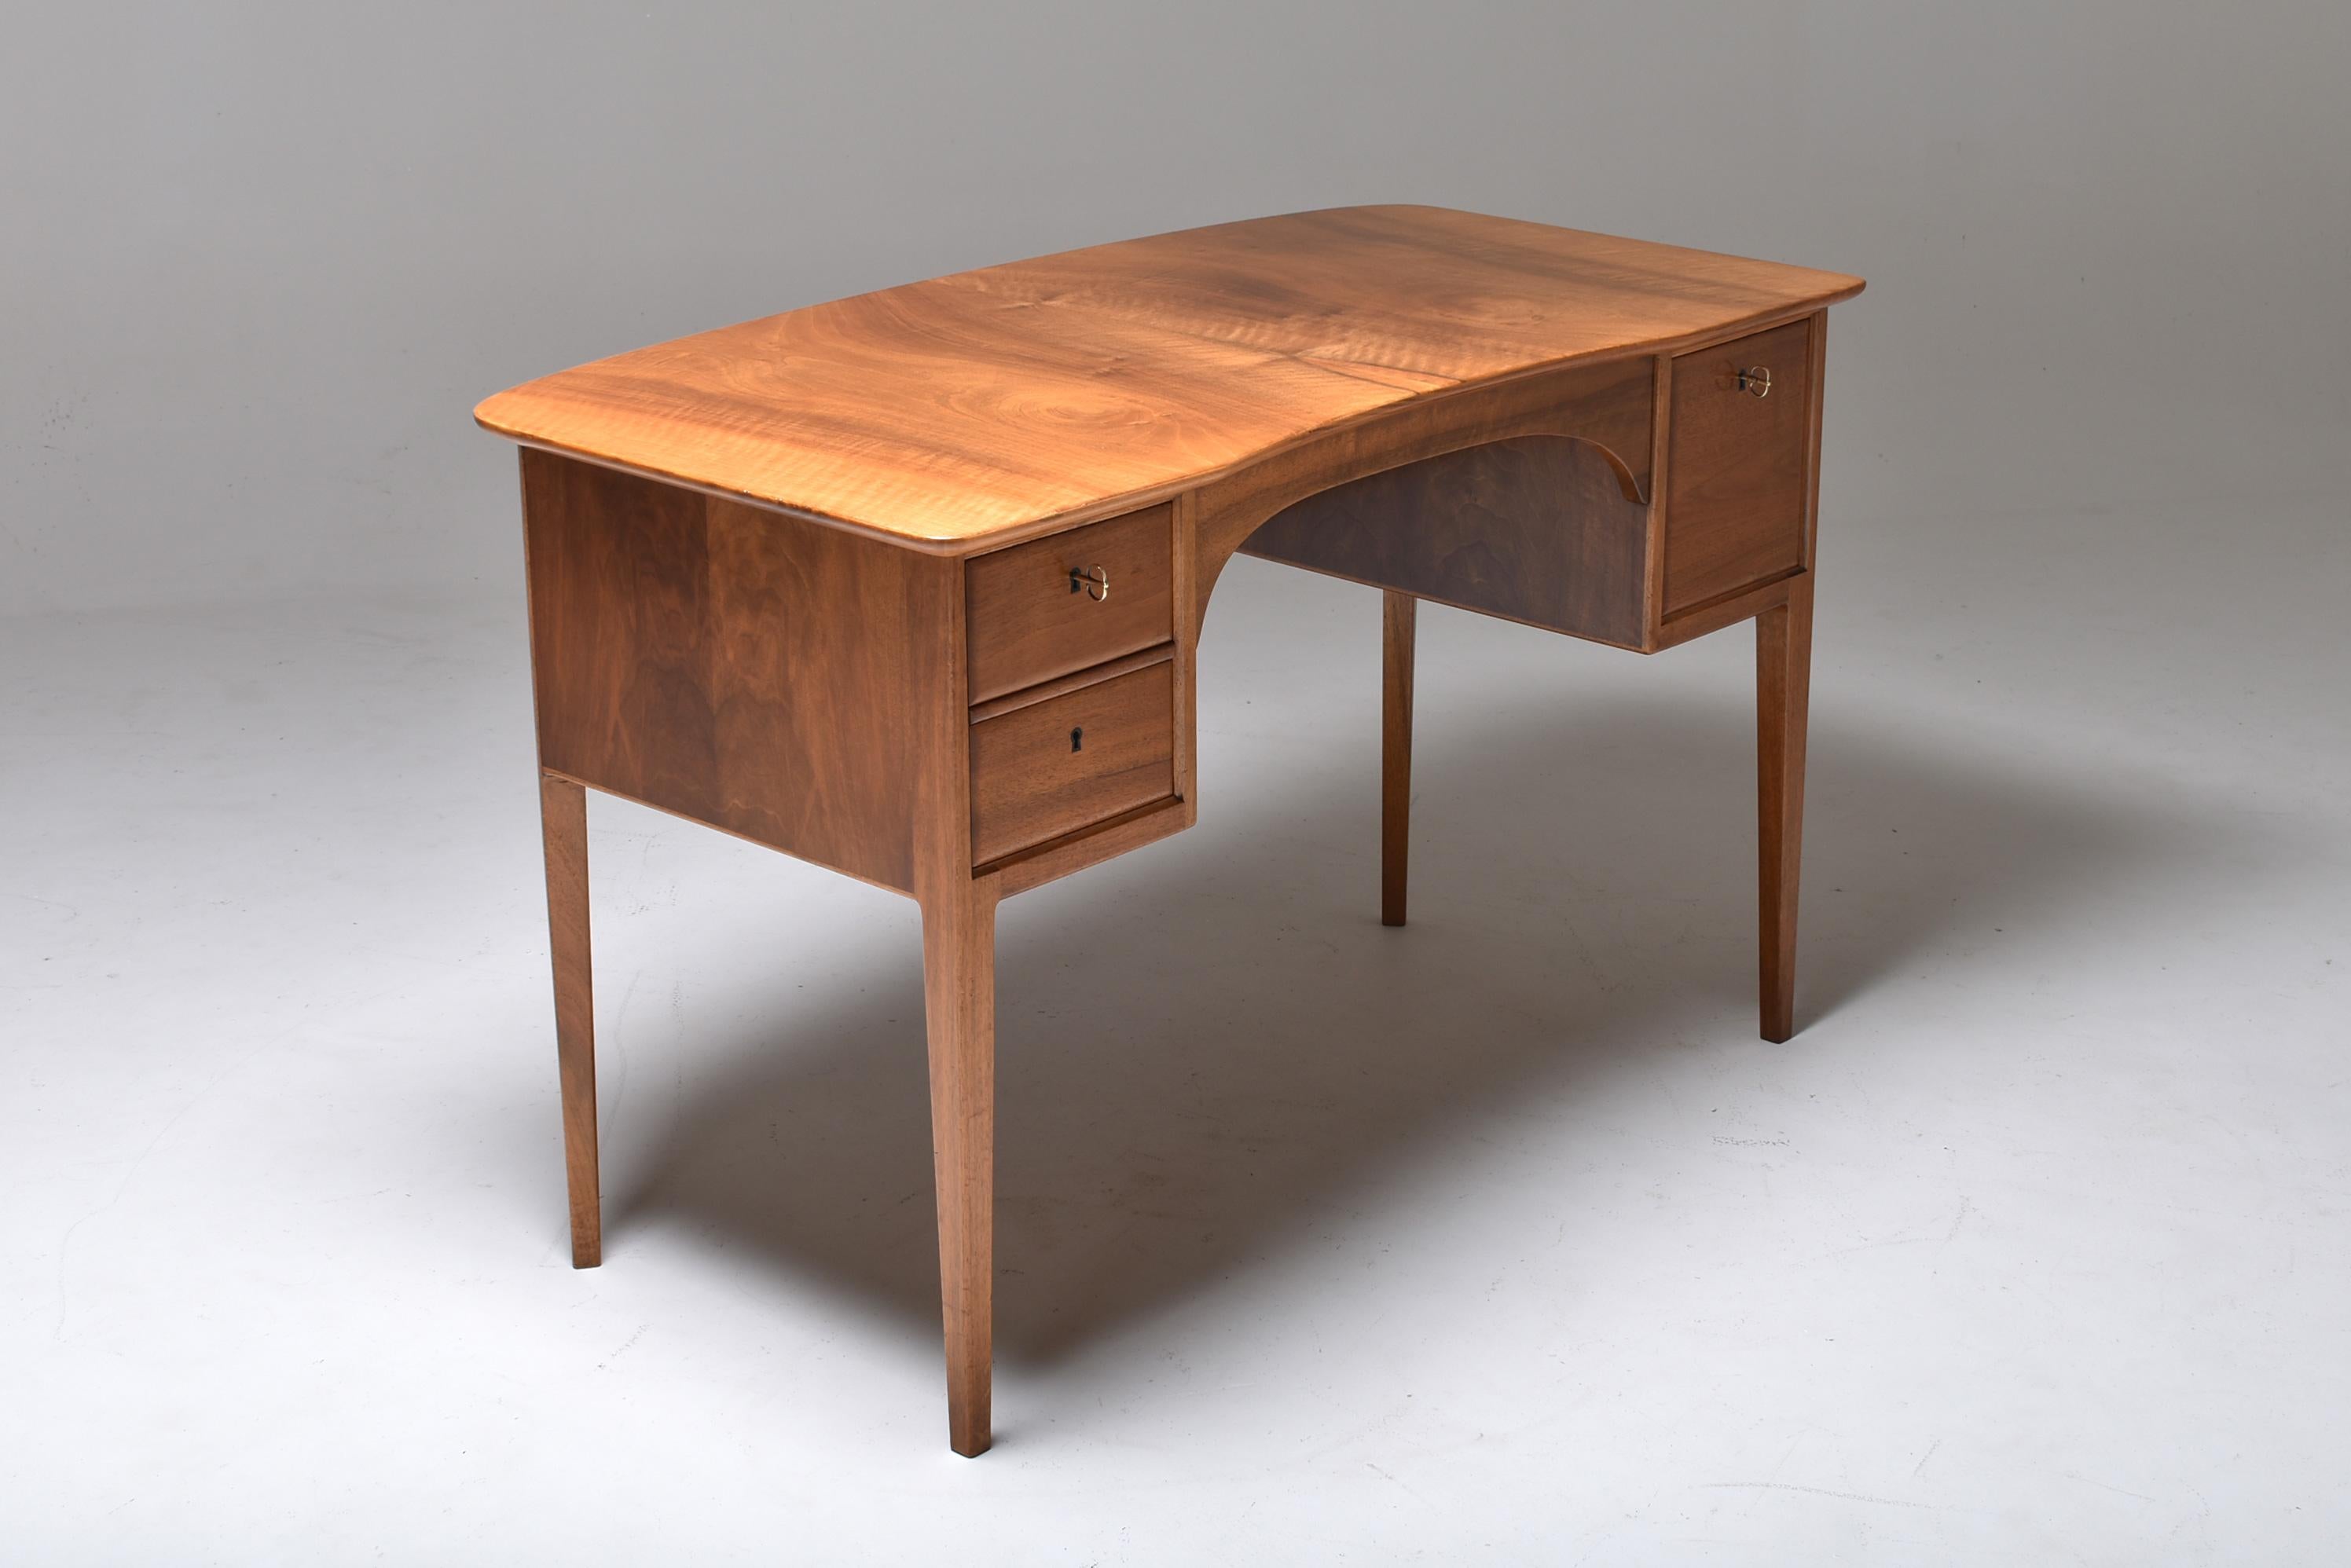 Writing desk Art-Deco, made in first half of last century, in Switzerland.
High craftmanship, combined with top material choice and elegant design.
The top is layed in 